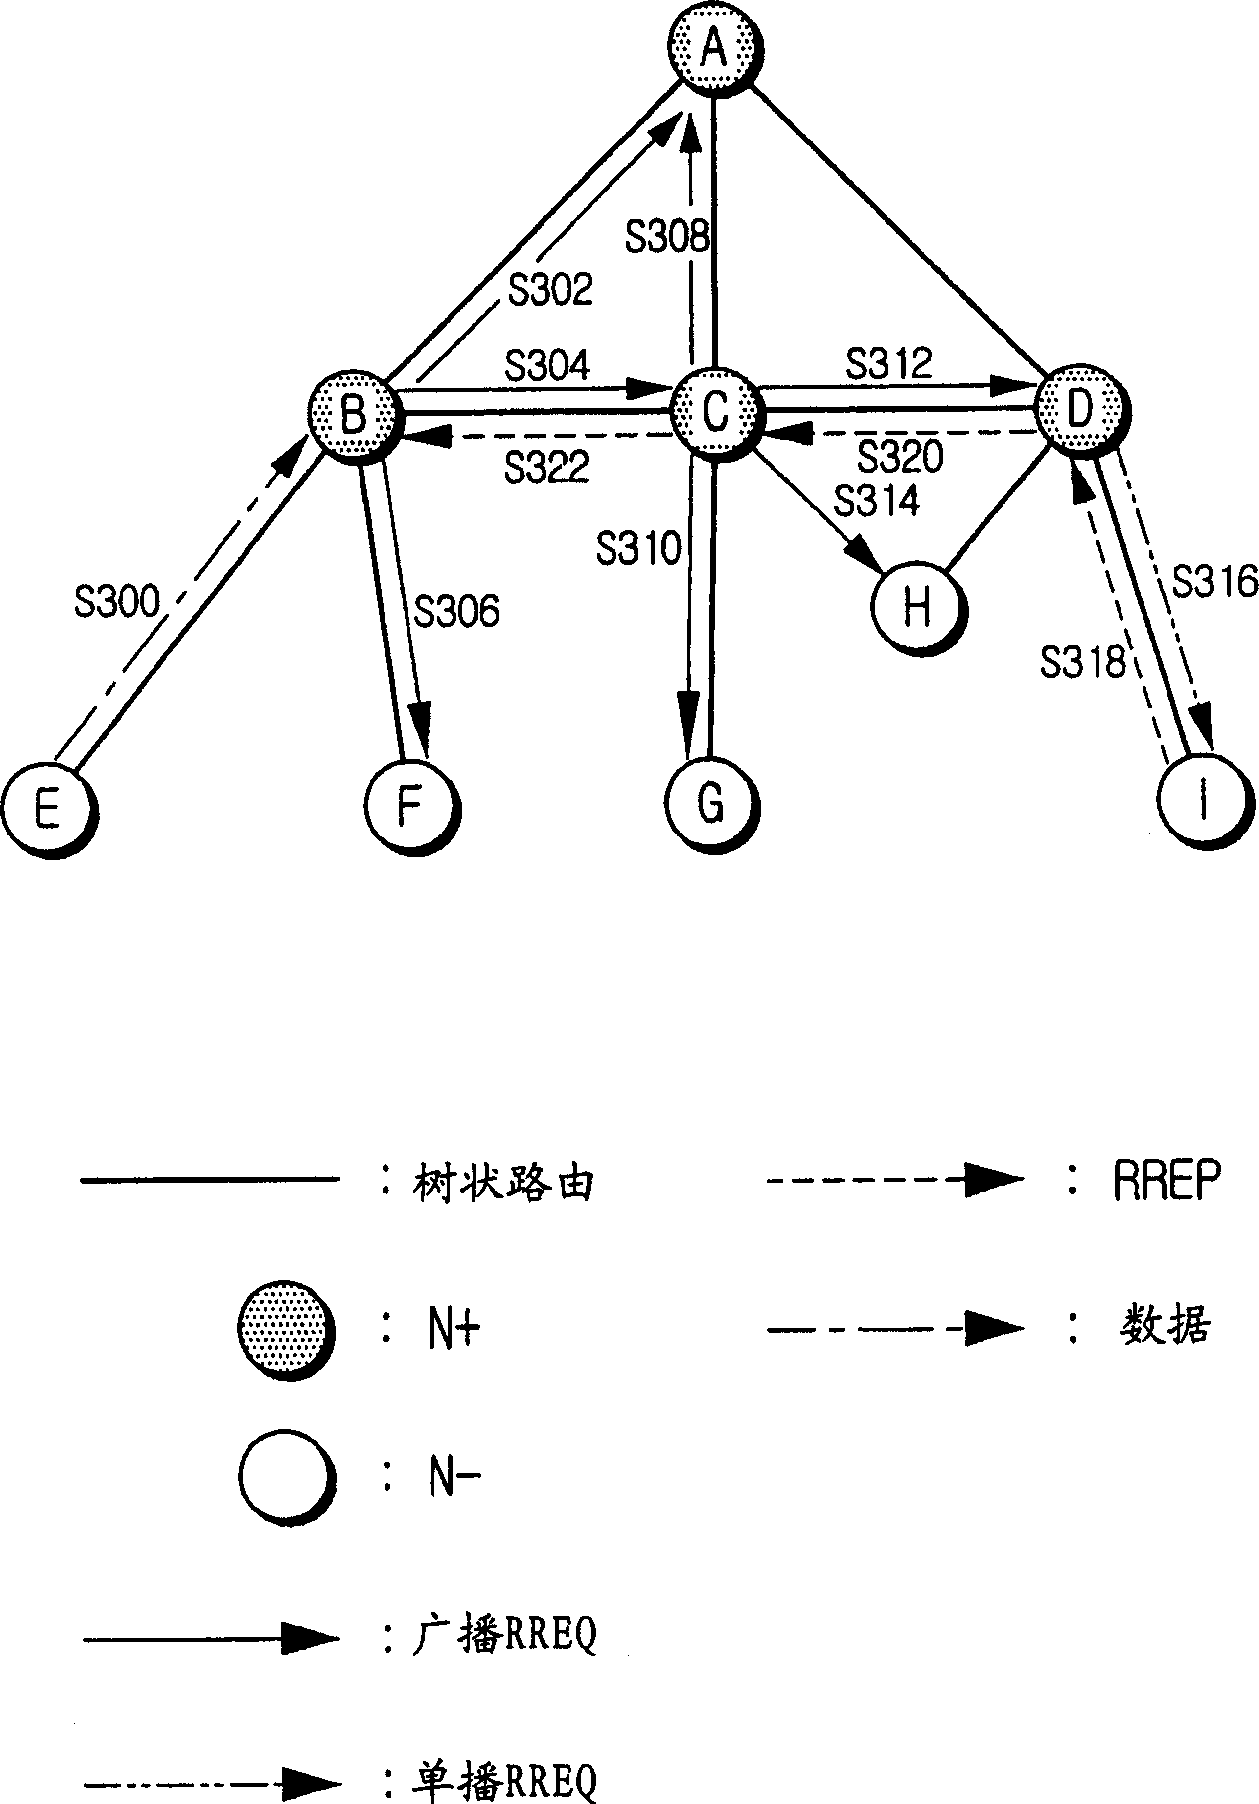 Apparatus and method for setup of optimum route using tree-topology